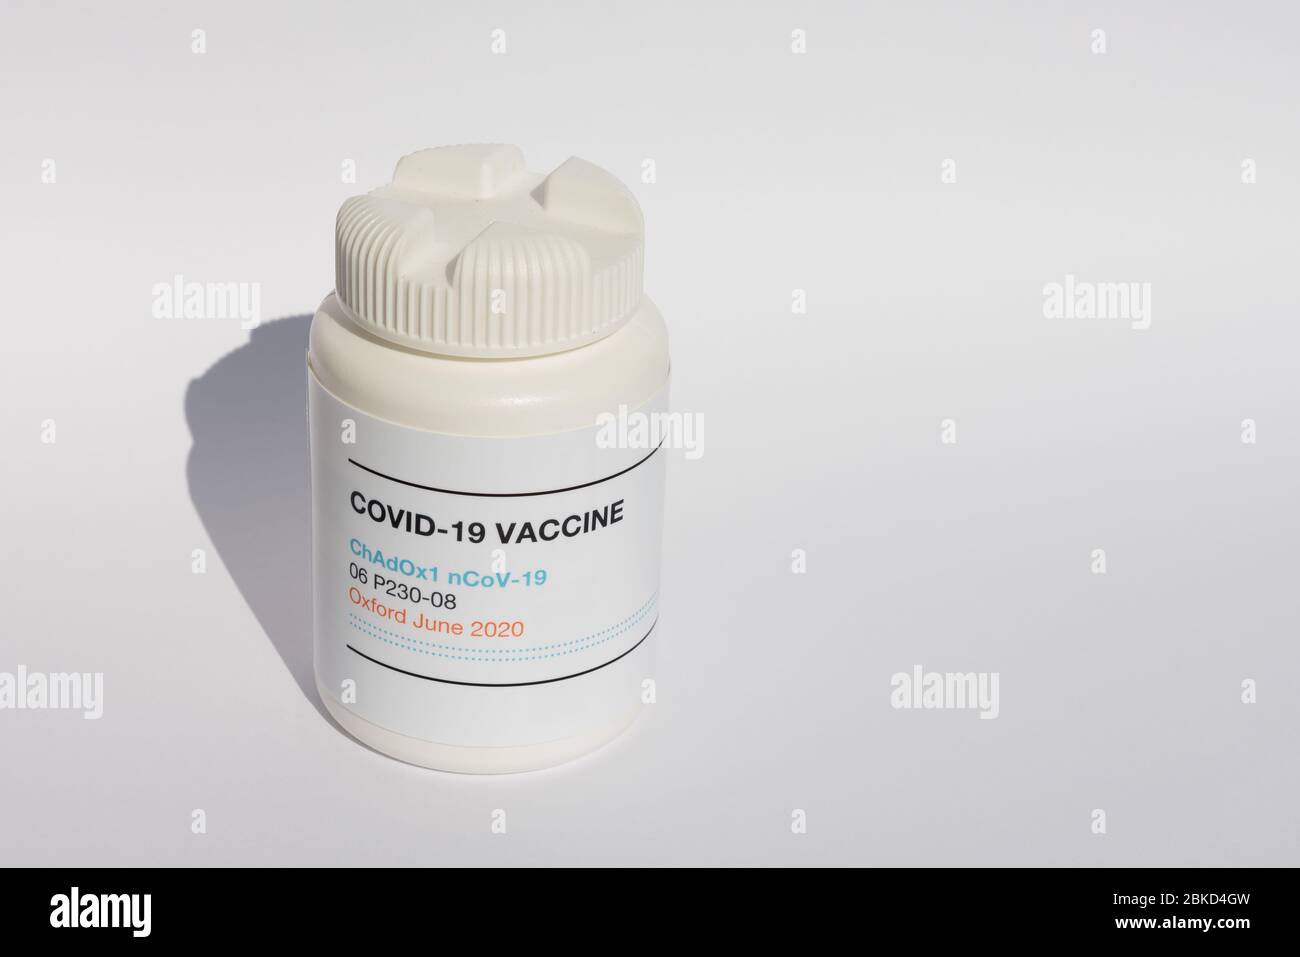 ChAdOx1 nCoV-19, The new experimental Vaccine from Oxford on a white background, Denmark, May 2, 2020 Stock Photo